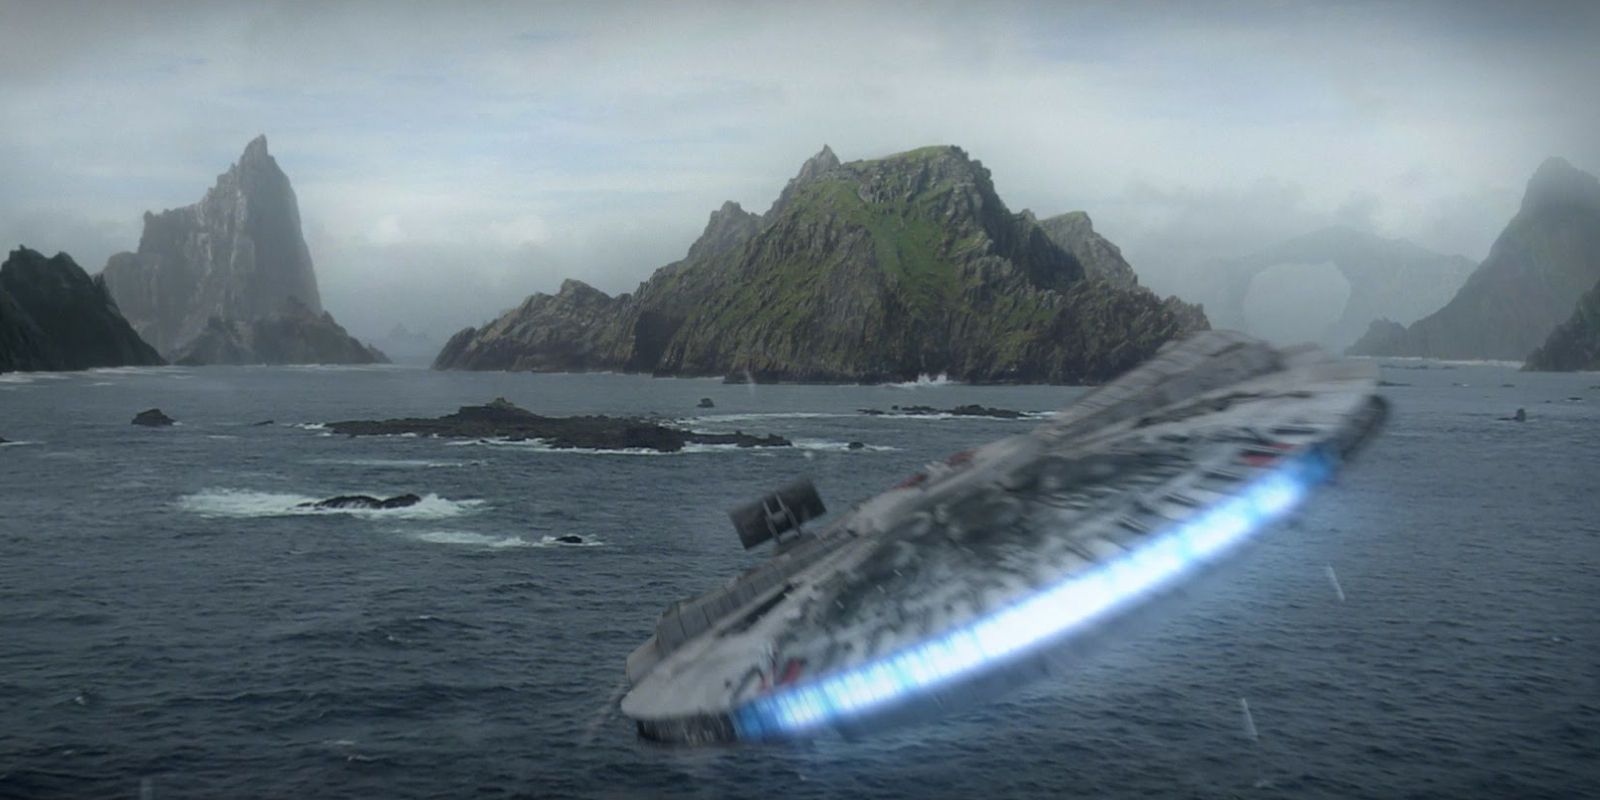 The Millennium Falcon flies towards Ahch-To in The Last Jedi